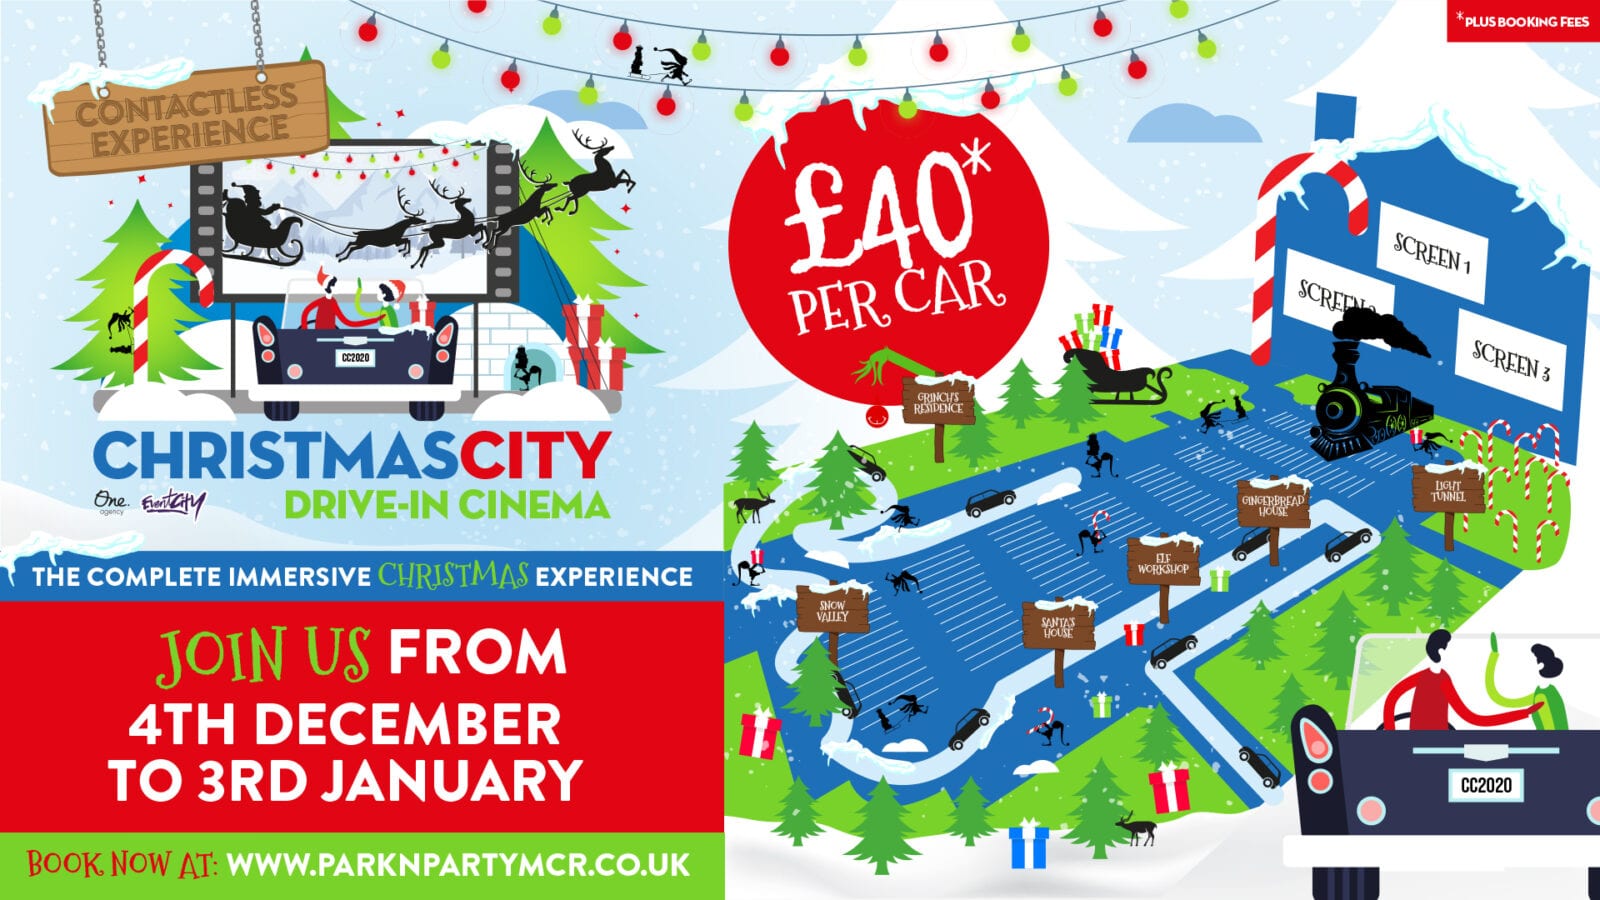 This drive-in Christmas event lets you whisk your whole family to the North Pole, The Manc